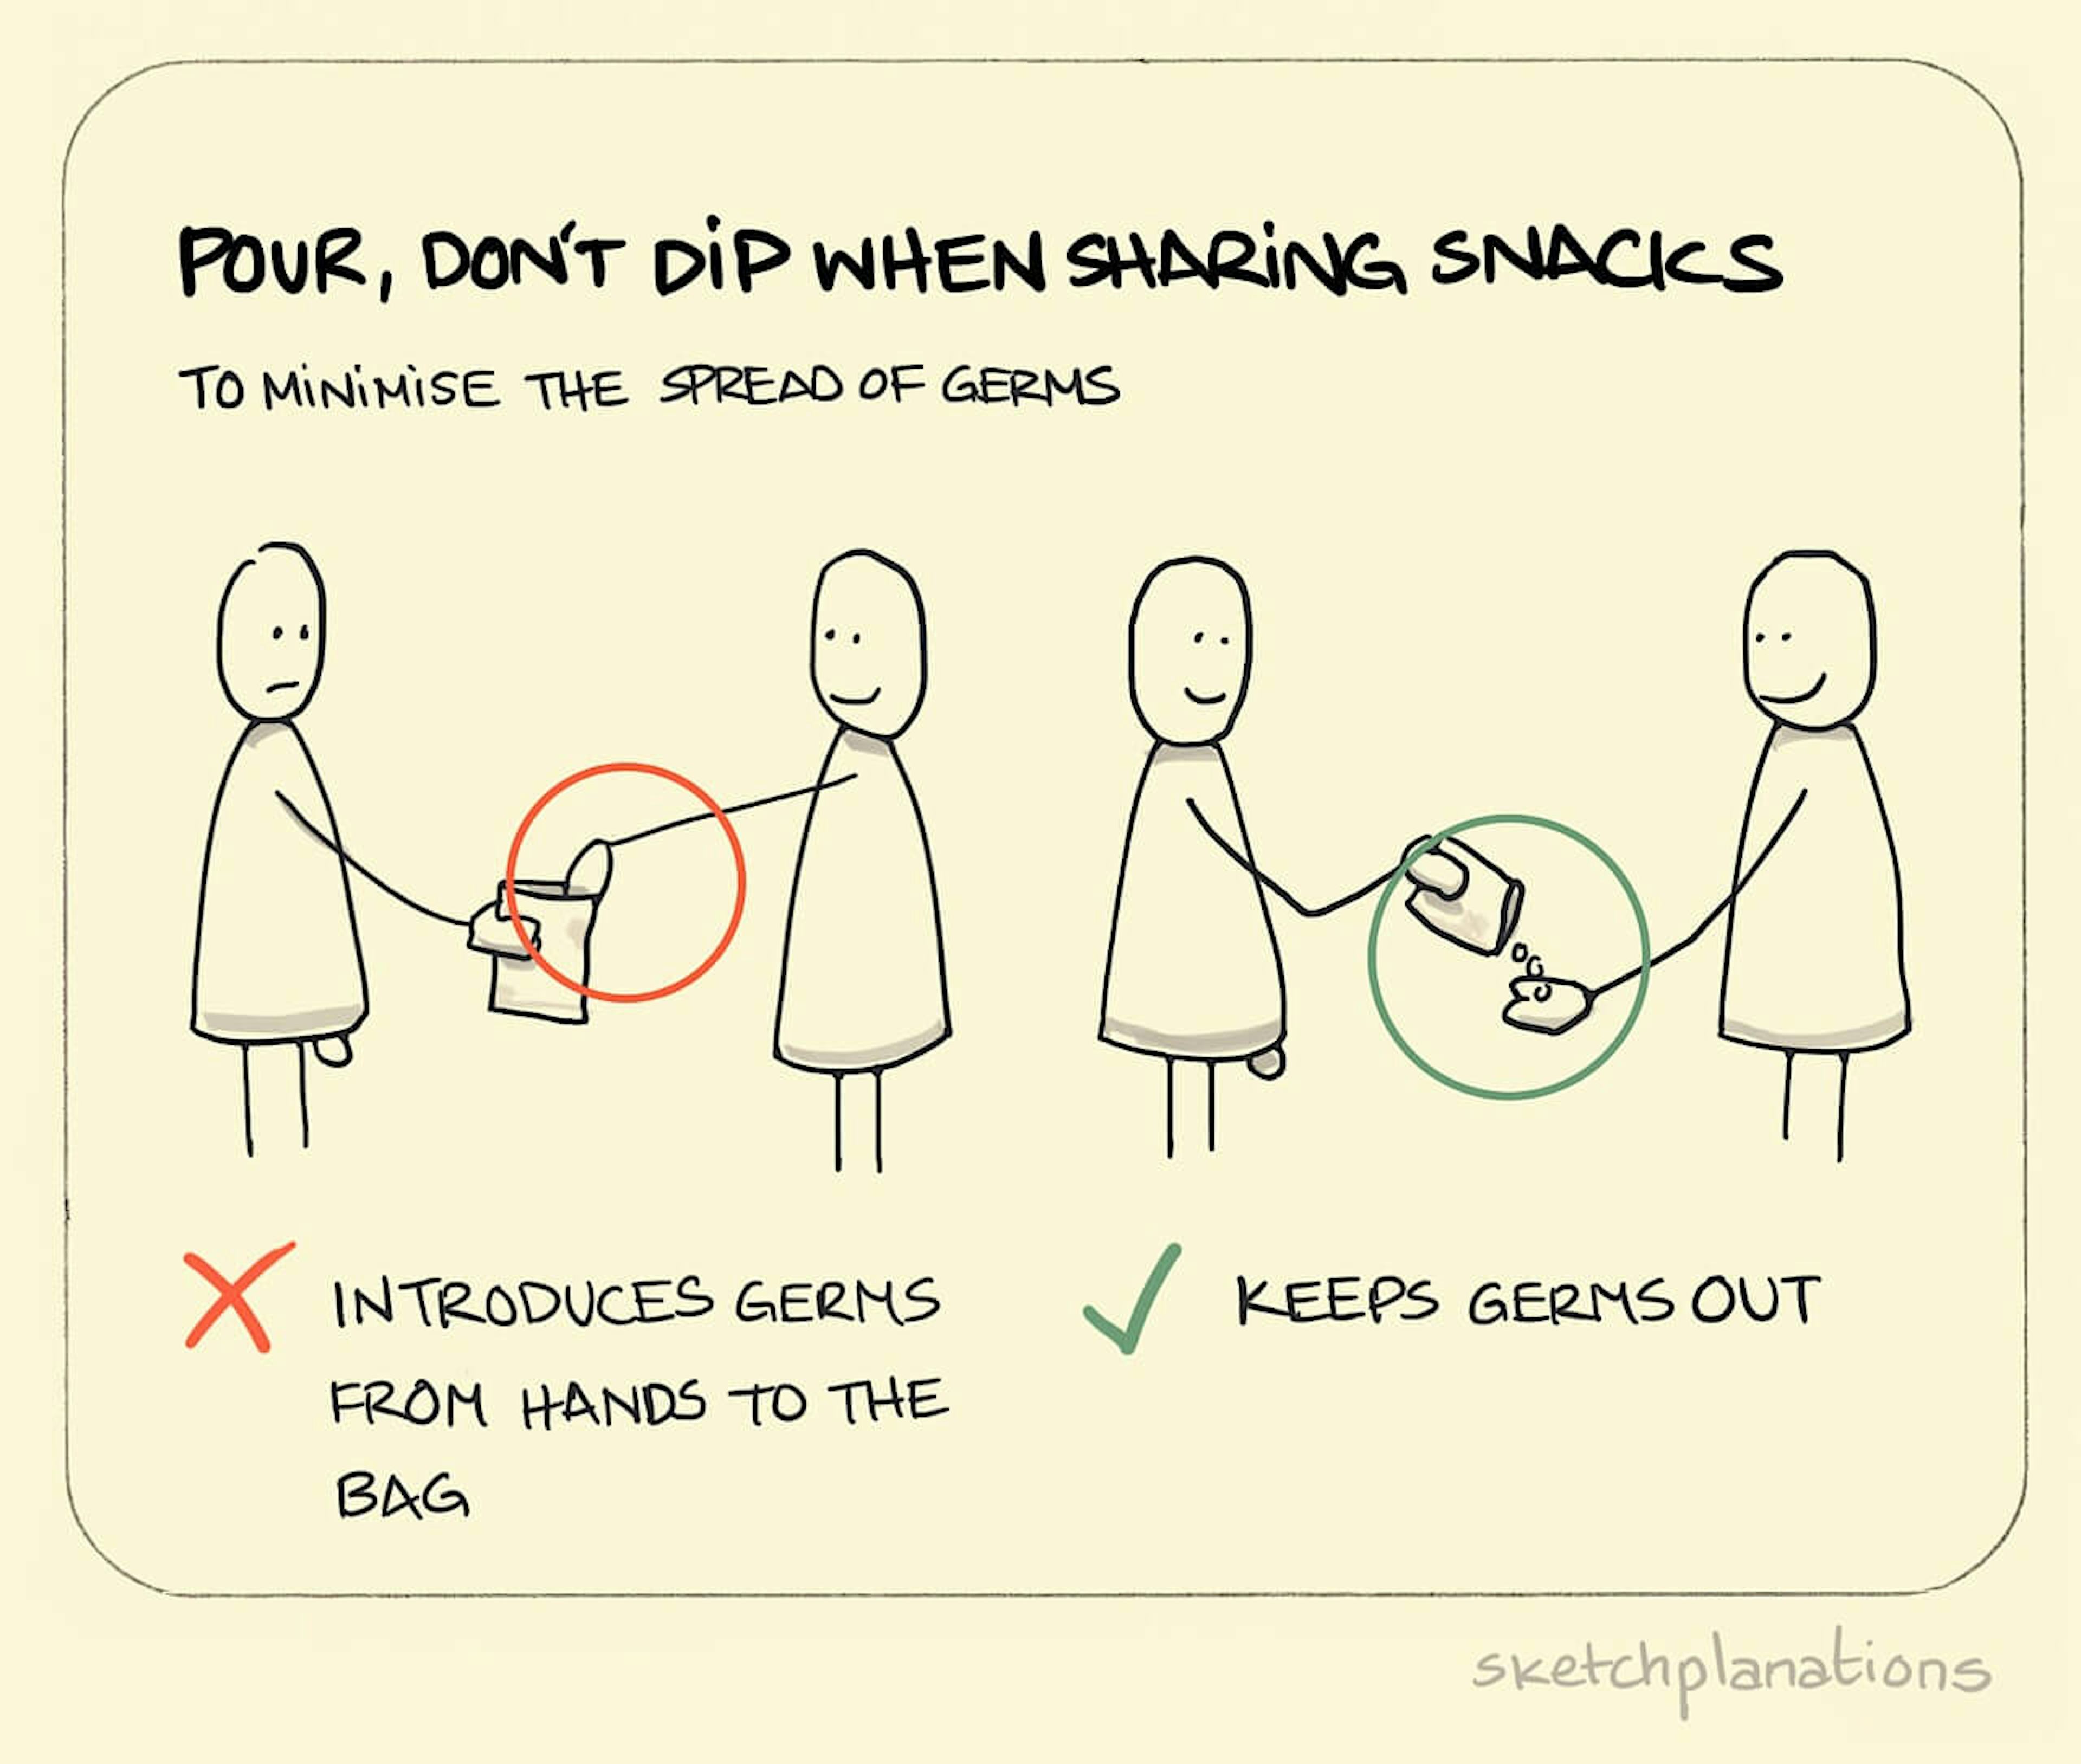 Pour, don't dip when sharing snacks illustration: on the left the snack sharer seems sad that their friend has plunged their hand into their open snack packet. On the right, they're a lot happier to share by pouring snacks from the packet into their friend's open hand. 